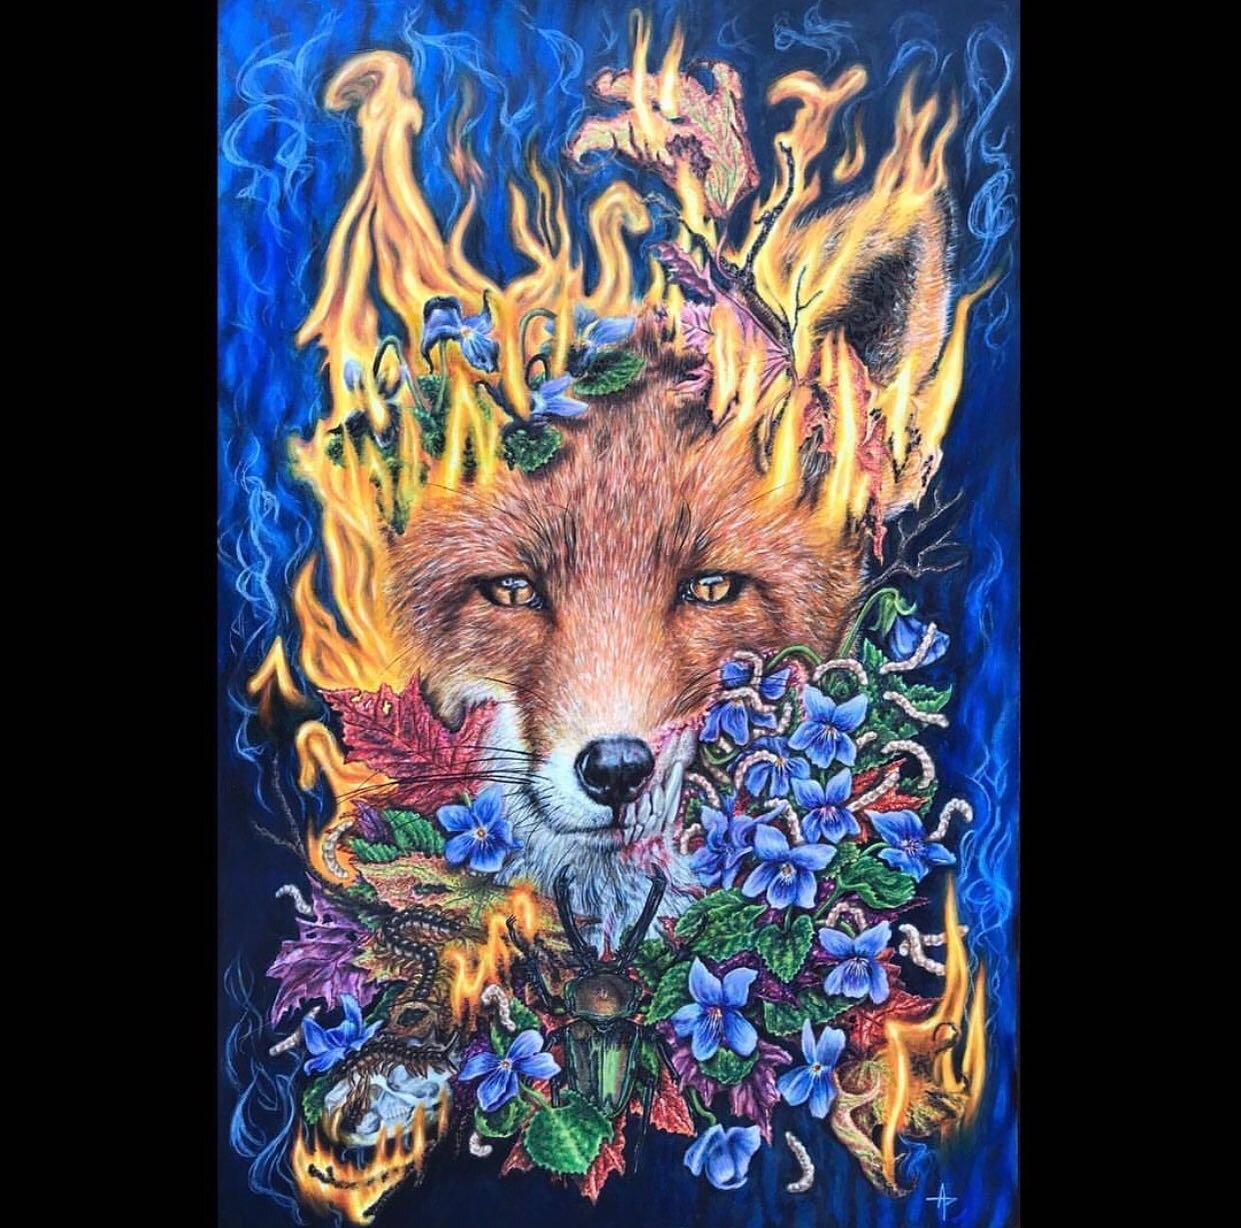 For my friend upon the birth of her son. 4 months and seven days.

@prismacolor 
@copic_official 
@goldenpaints

#artistsoninstagram #art #atwork #artist #drawing #painting #penandink #prismacolor #copicmarkers #markers #fox #fire #violets #flowers #